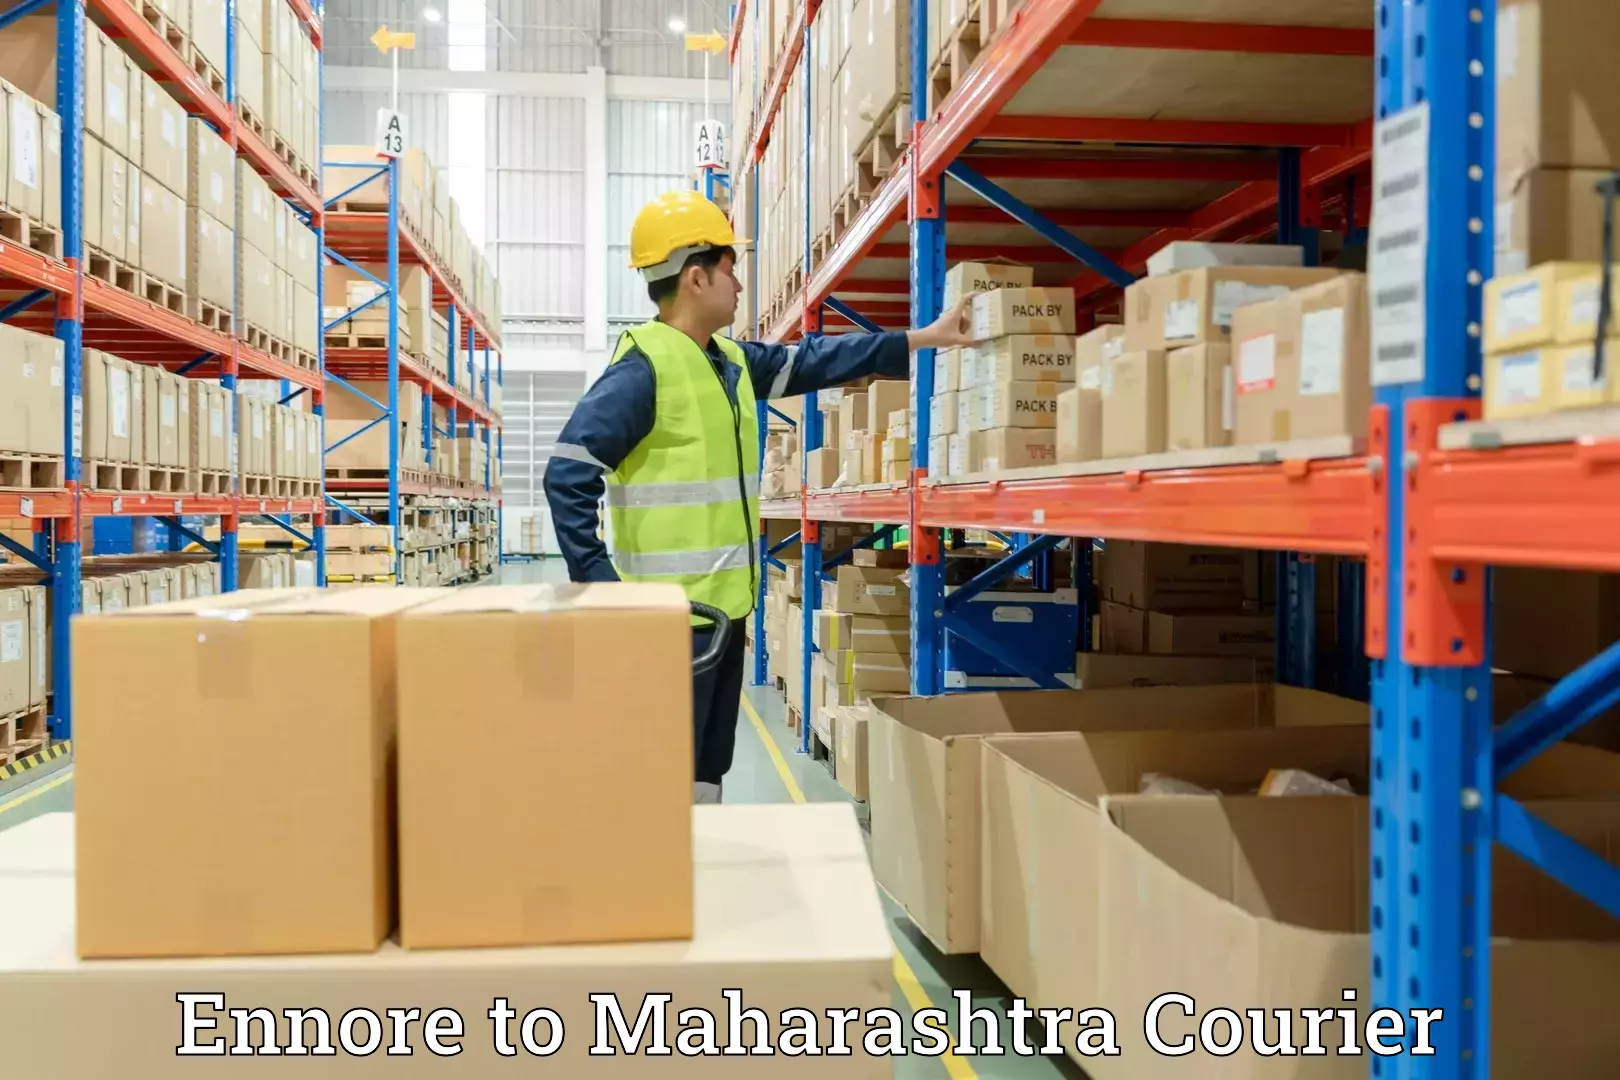 Professional movers and packers in Ennore to Maharashtra